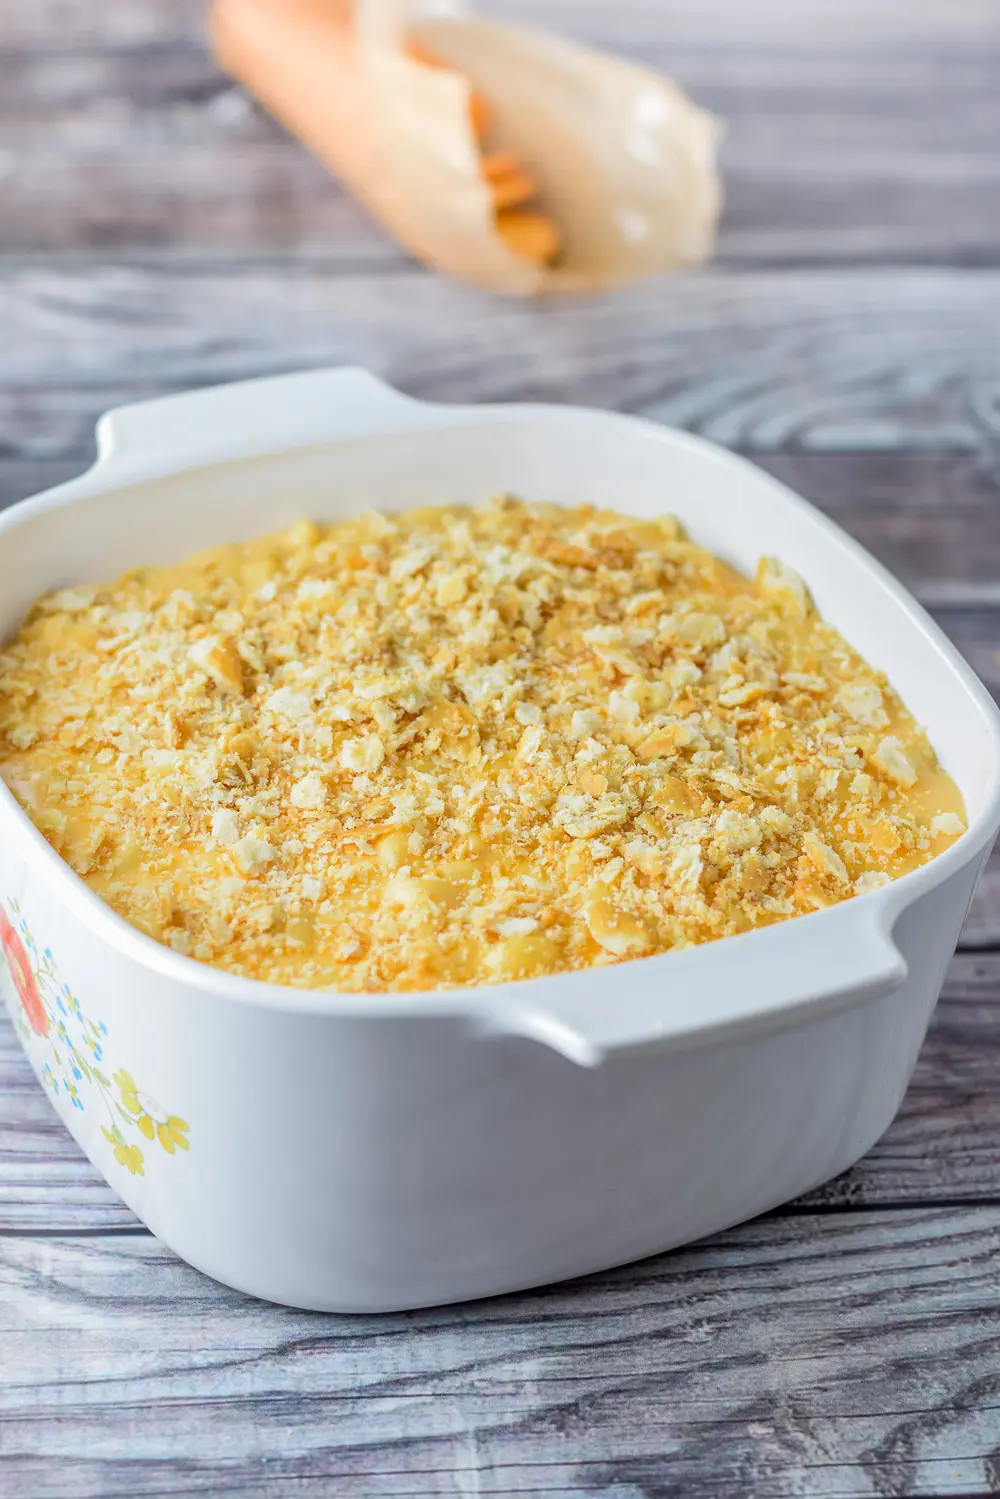 Ritz crackers crumbled on cheese sauce and macaroni in the baking dish